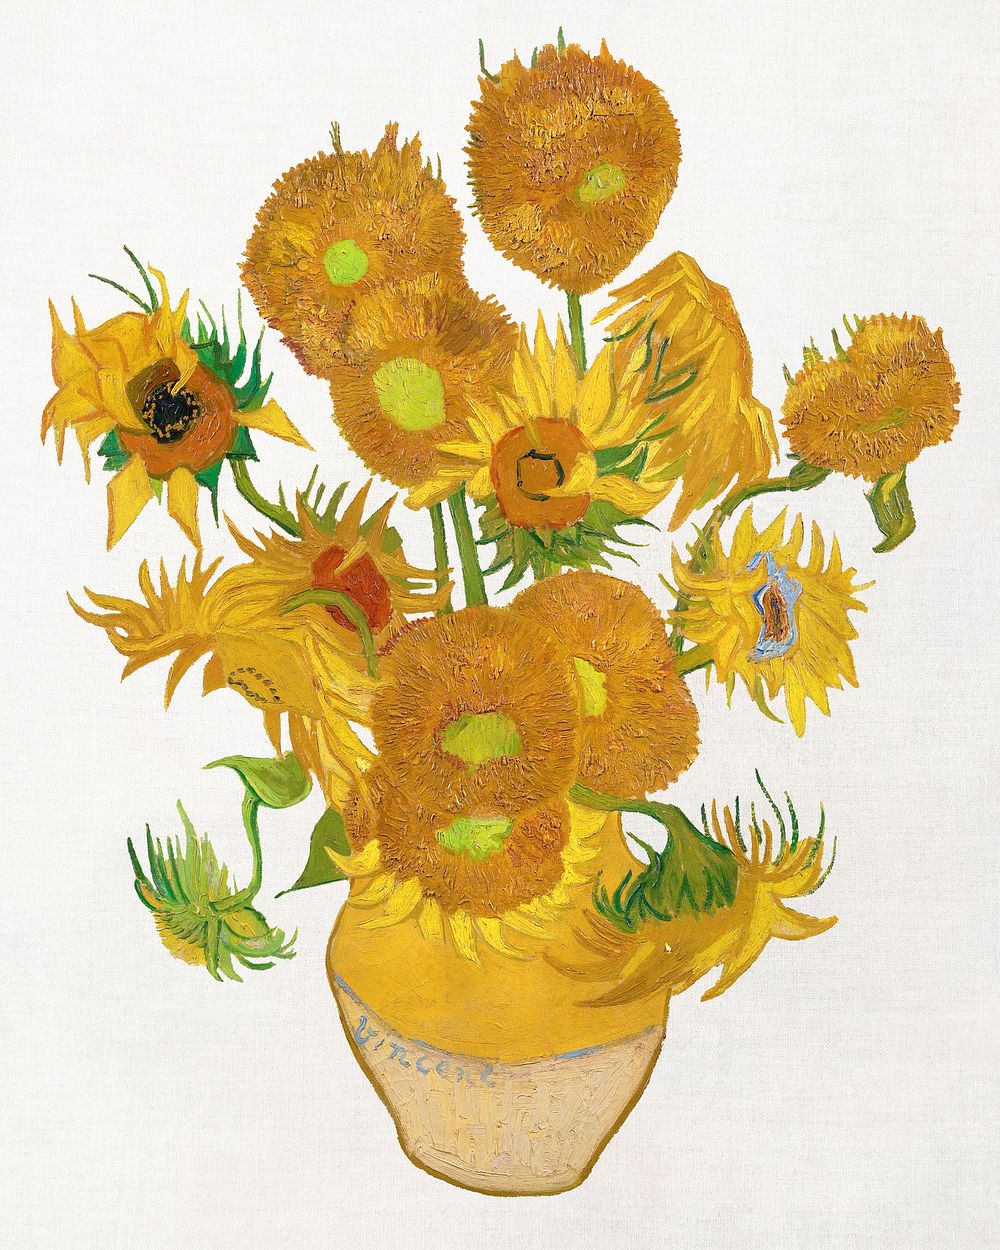 Van Gogh&rsquo;s Sunflowers illustration, famous painting, remastered by rawpixel